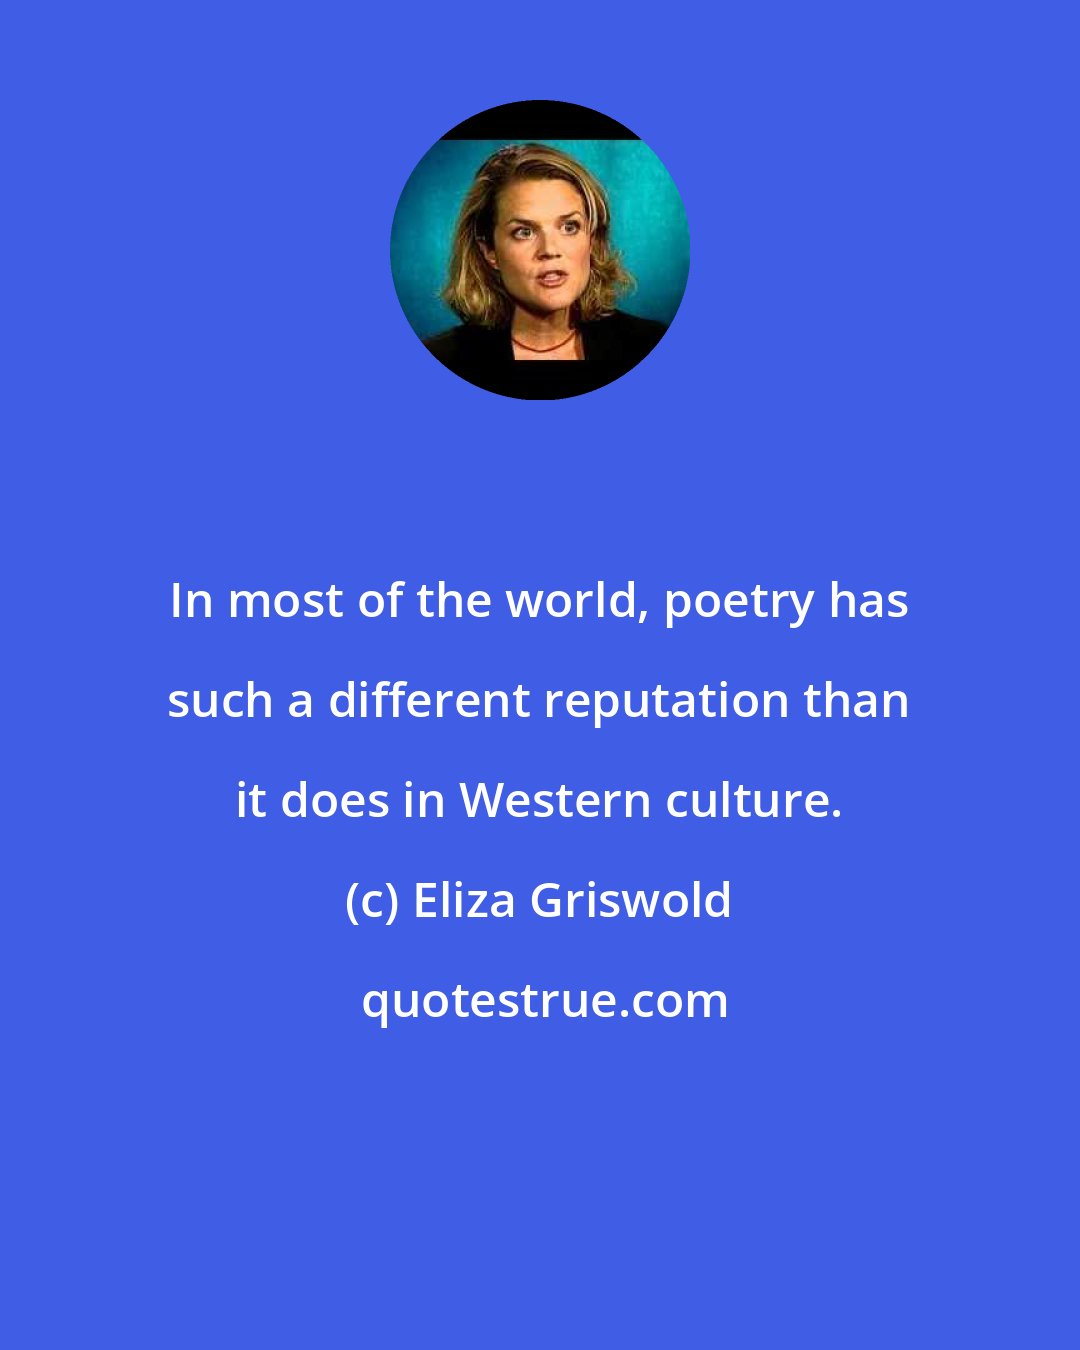 Eliza Griswold: In most of the world, poetry has such a different reputation than it does in Western culture.